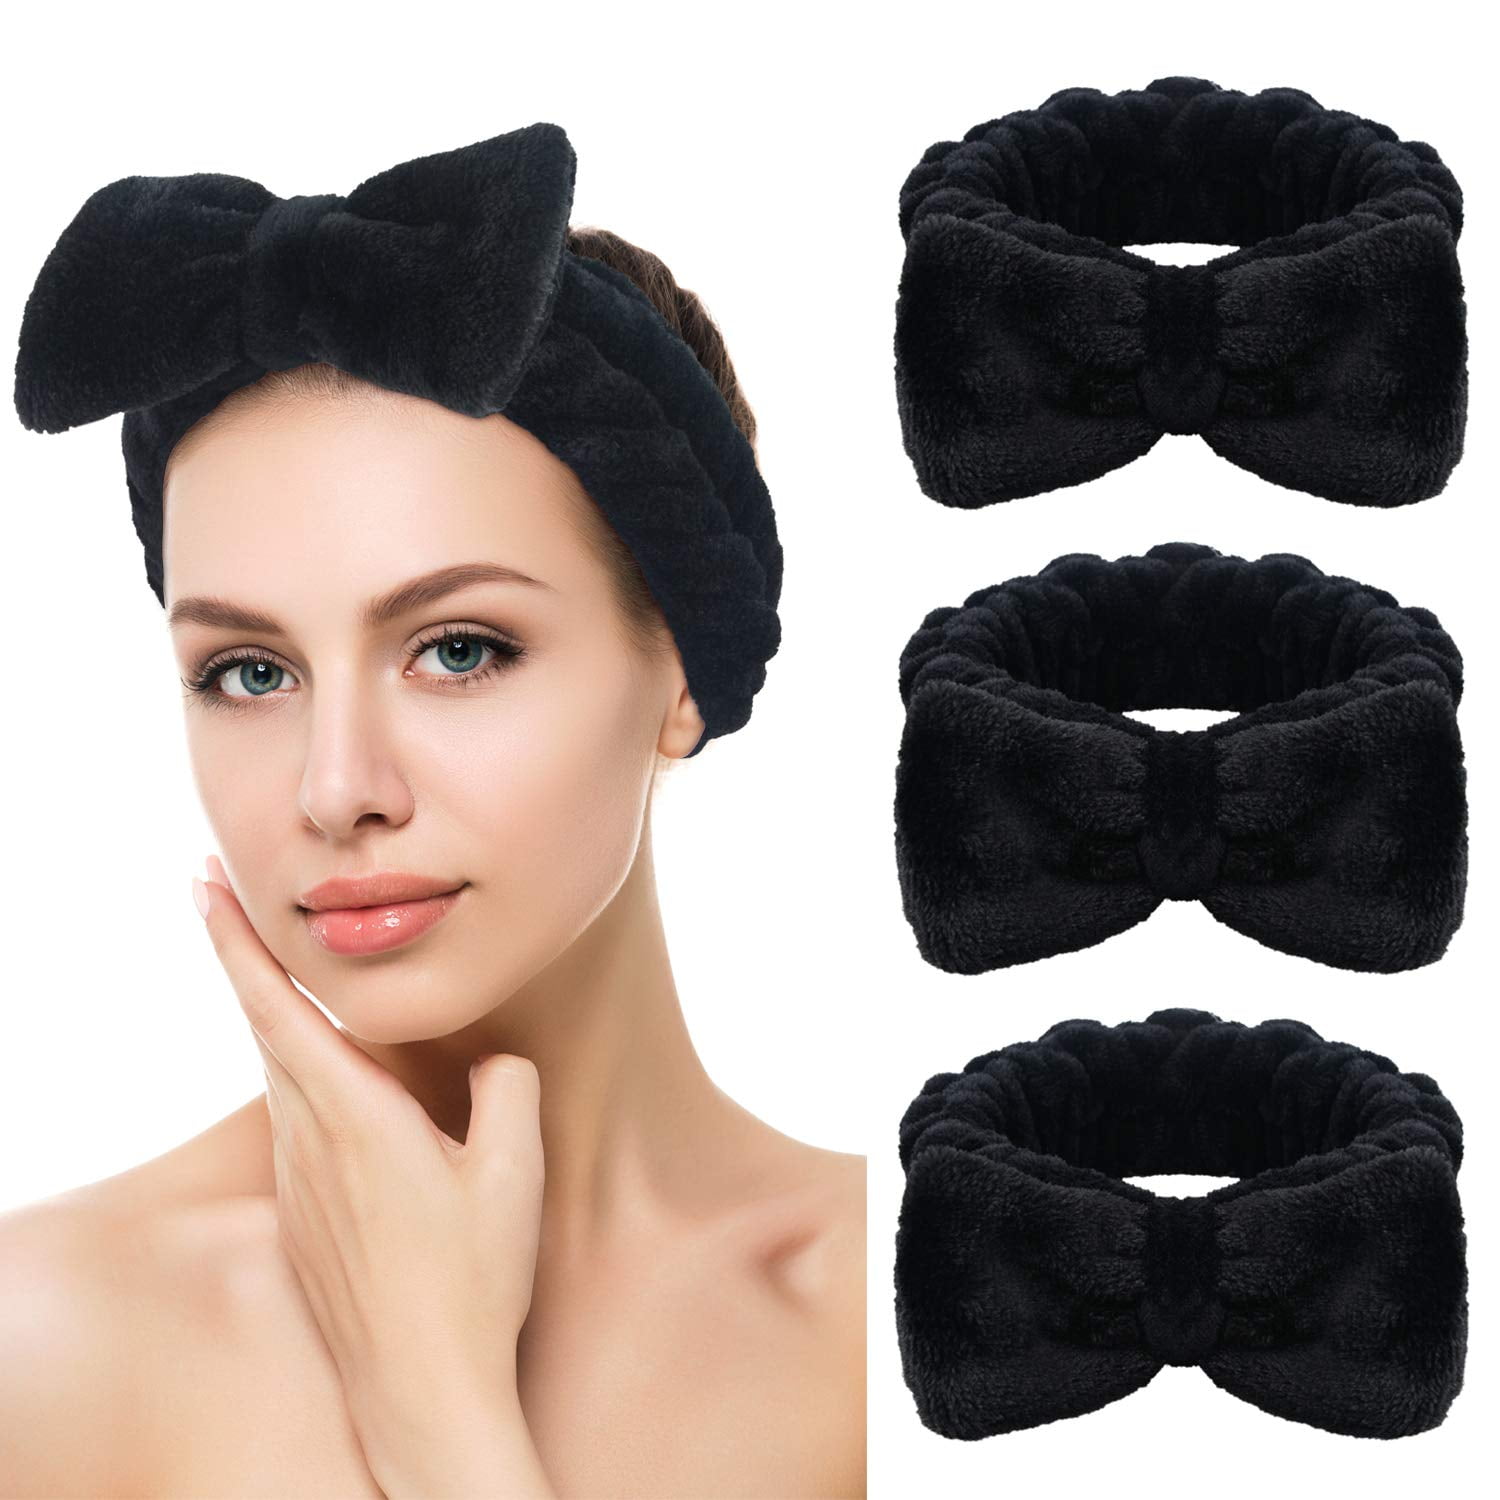 Bow Hair Bands Spa Headband for Washing Face Makeup Headband For Women  Black 3Pack